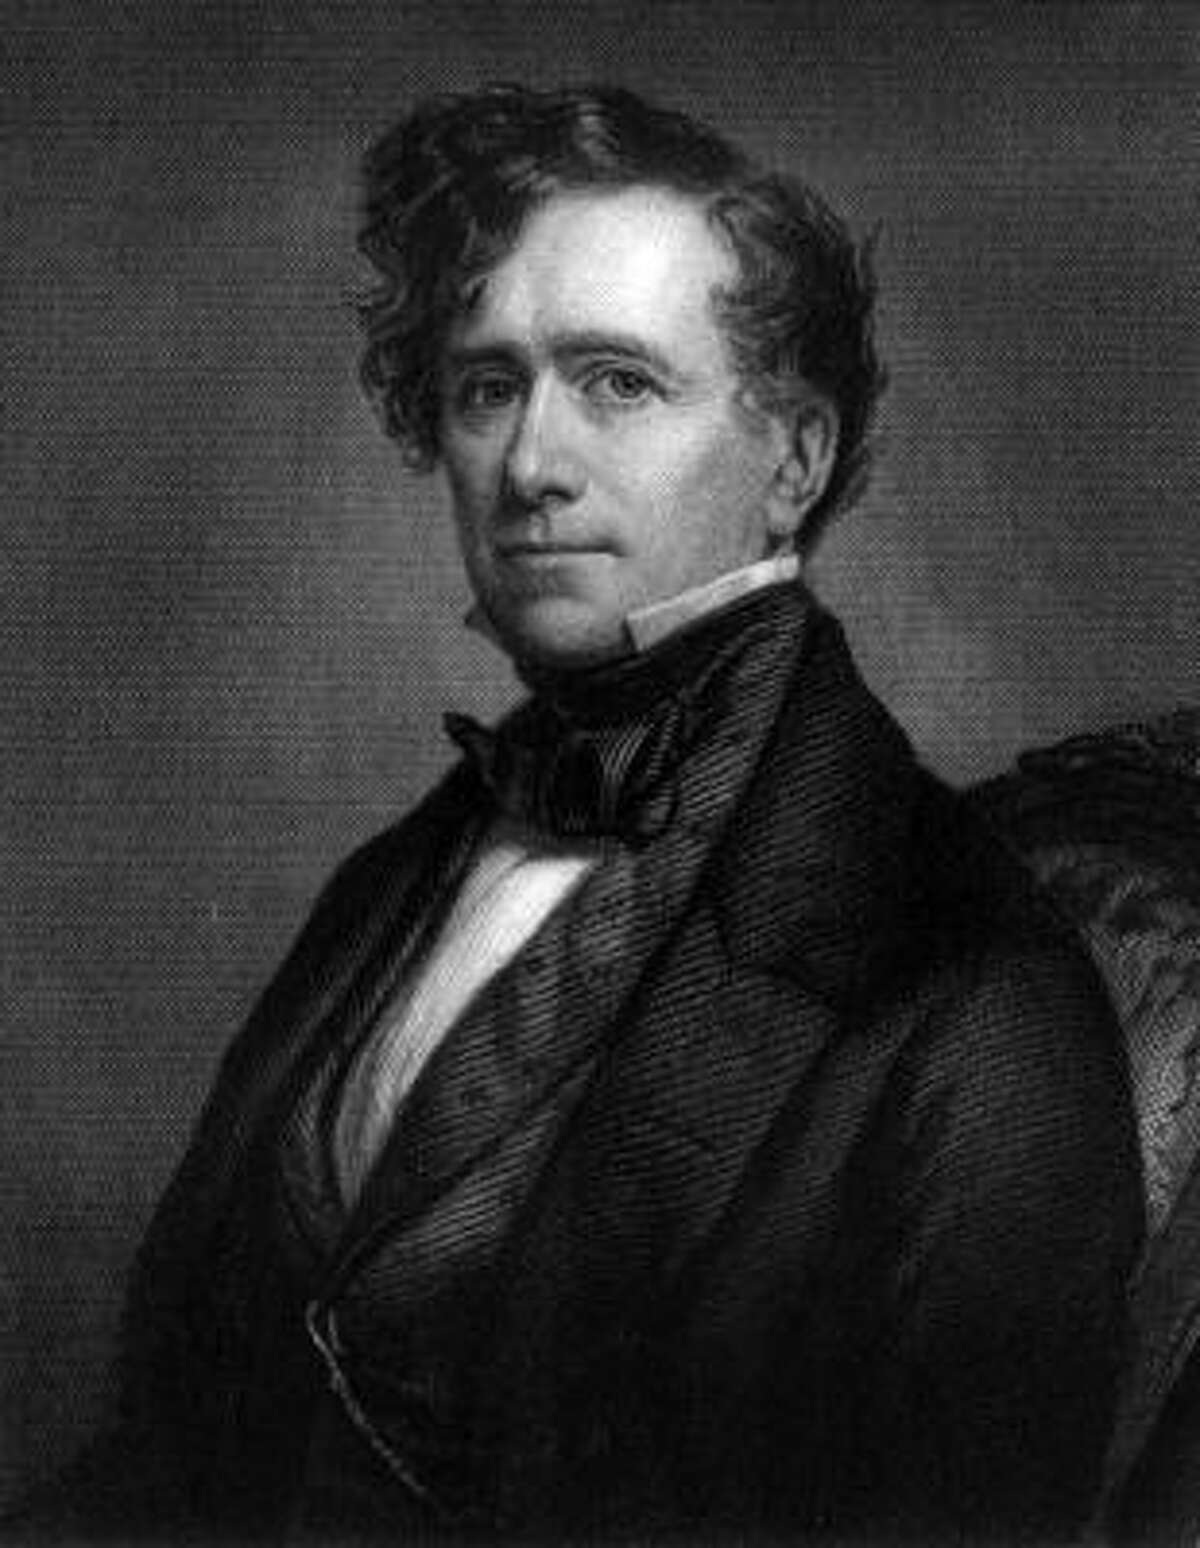 Franklin Pierce Franklin Pierce was the 14th president and served between 1853 and 1857. By Simonton's estimates, Pierce had an IQ of 141. After graduating from Bowdoin College, Pierce was elected to the New Hampshire legislature at the age of 24 and became its speaker two years later.